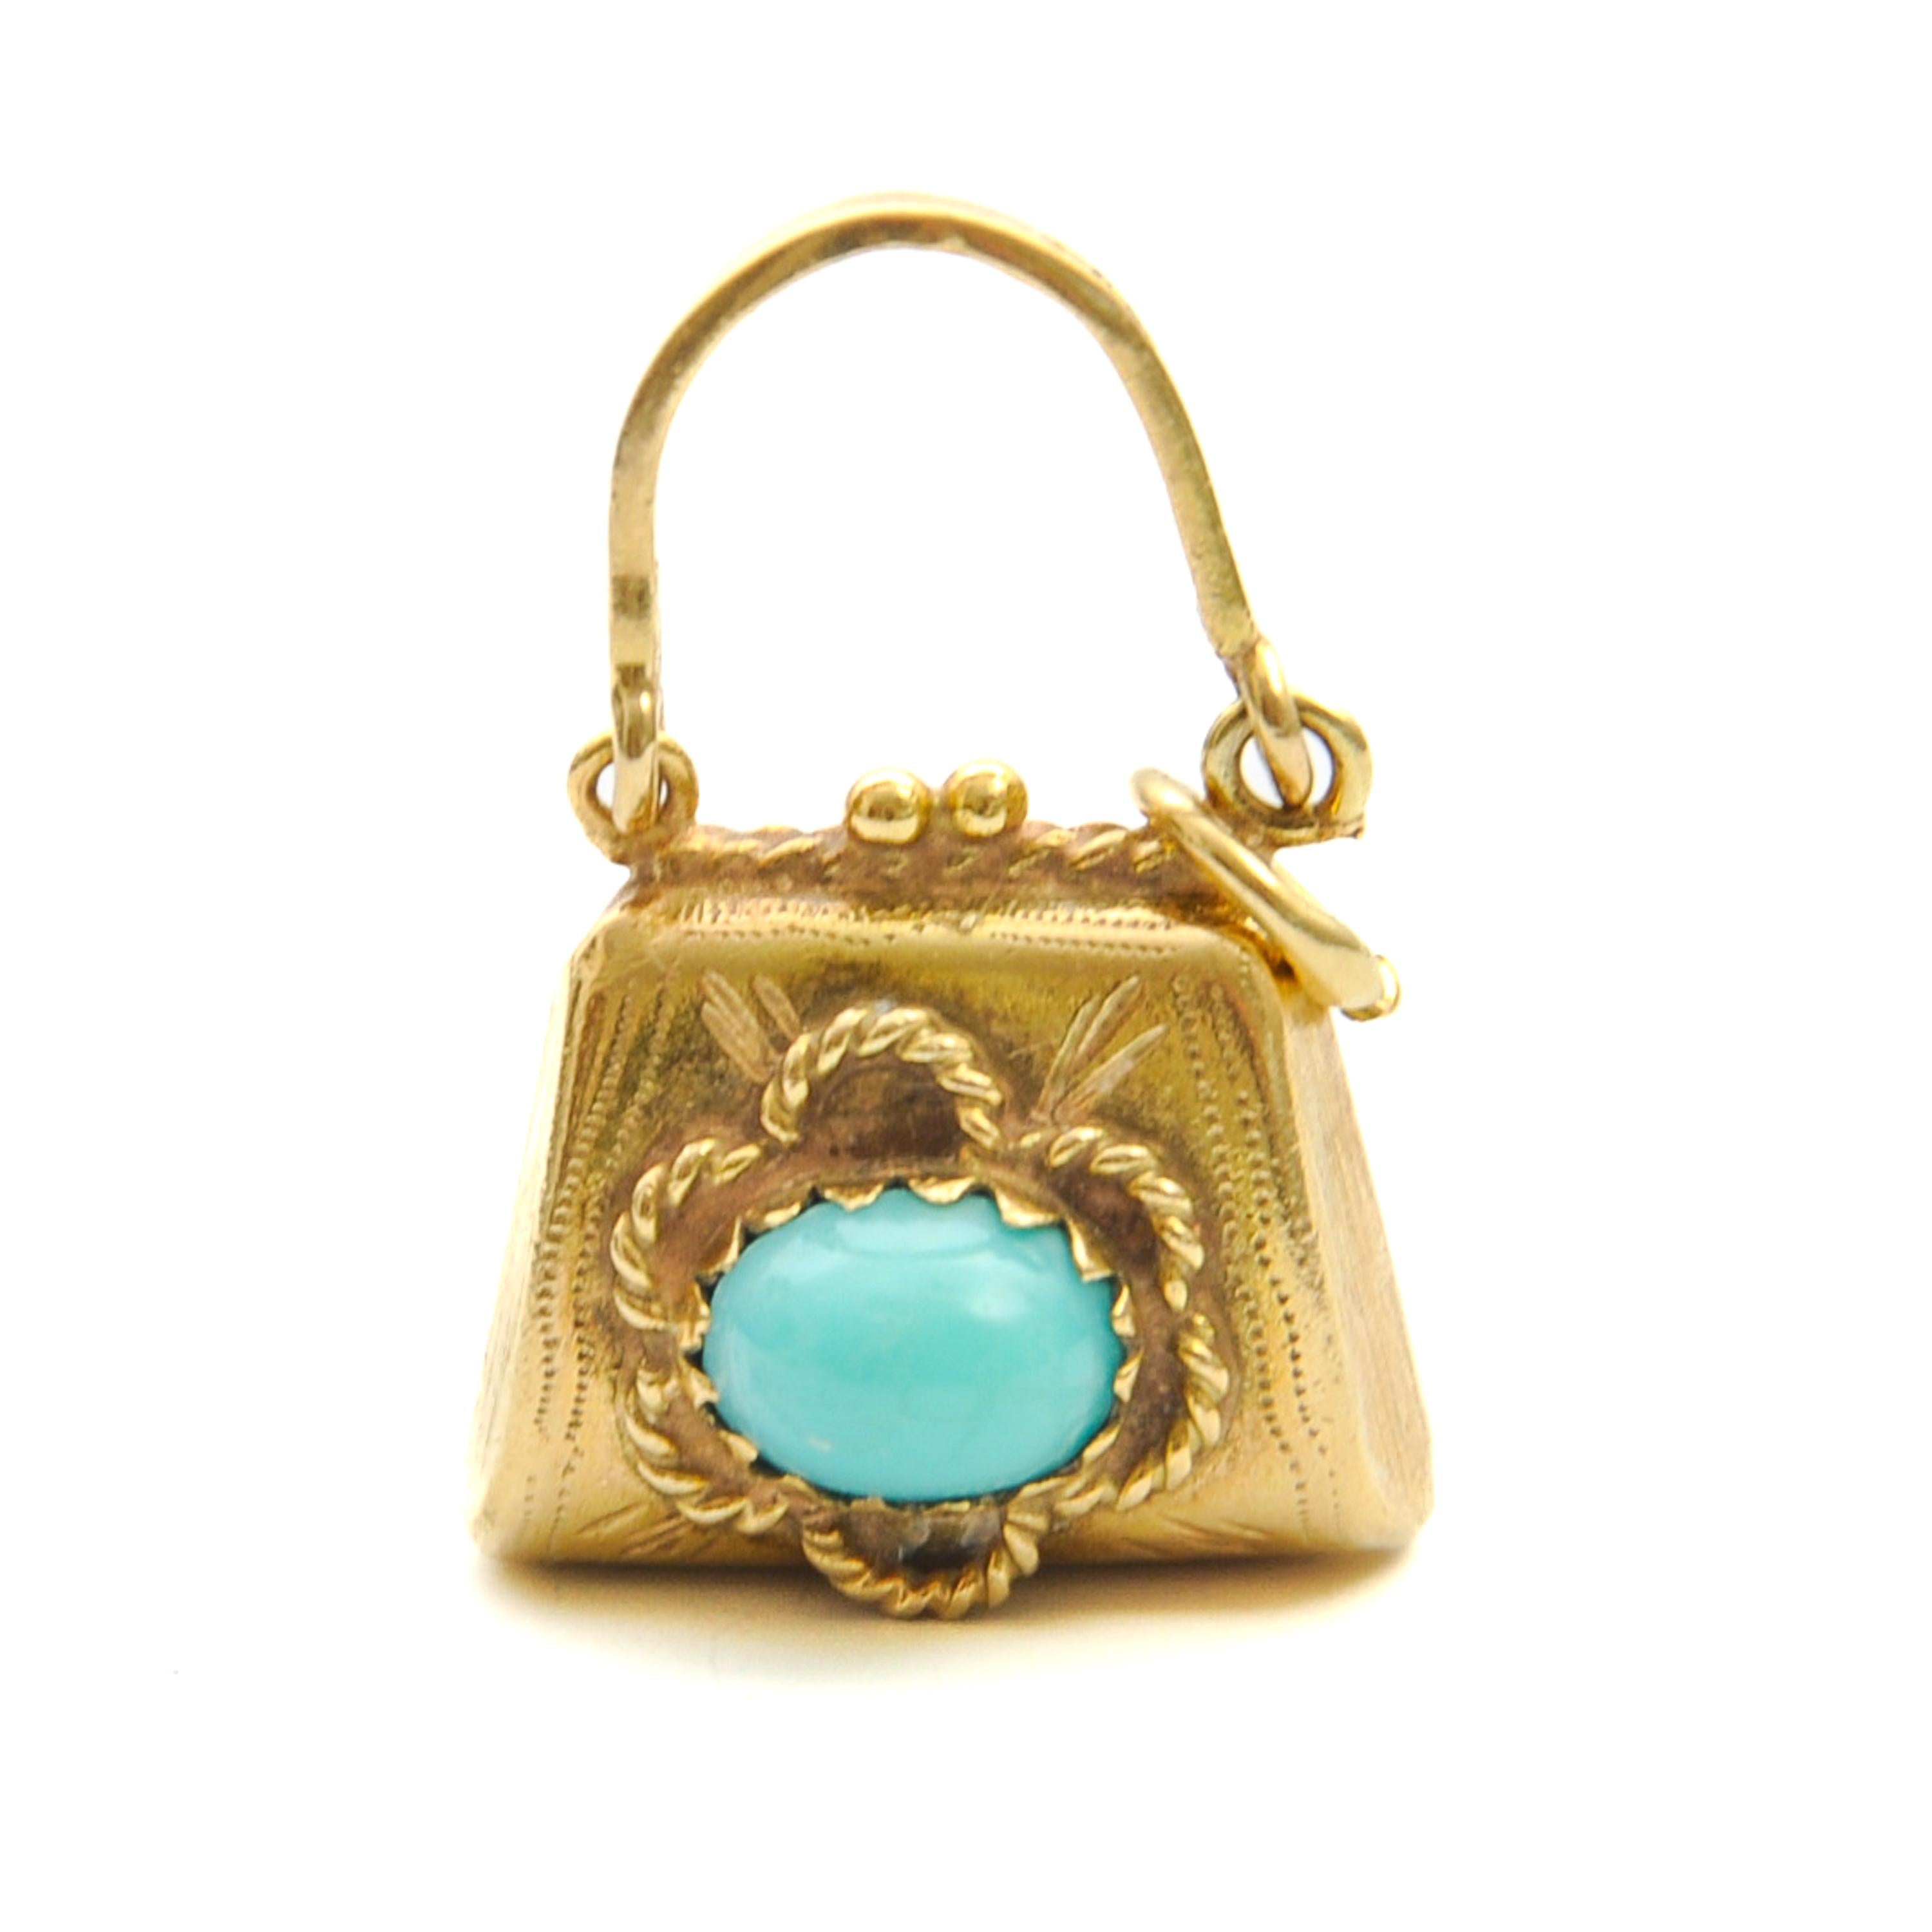 Vintage 14K Gold and Turquoise Purse Charm Pendant For Sale 1